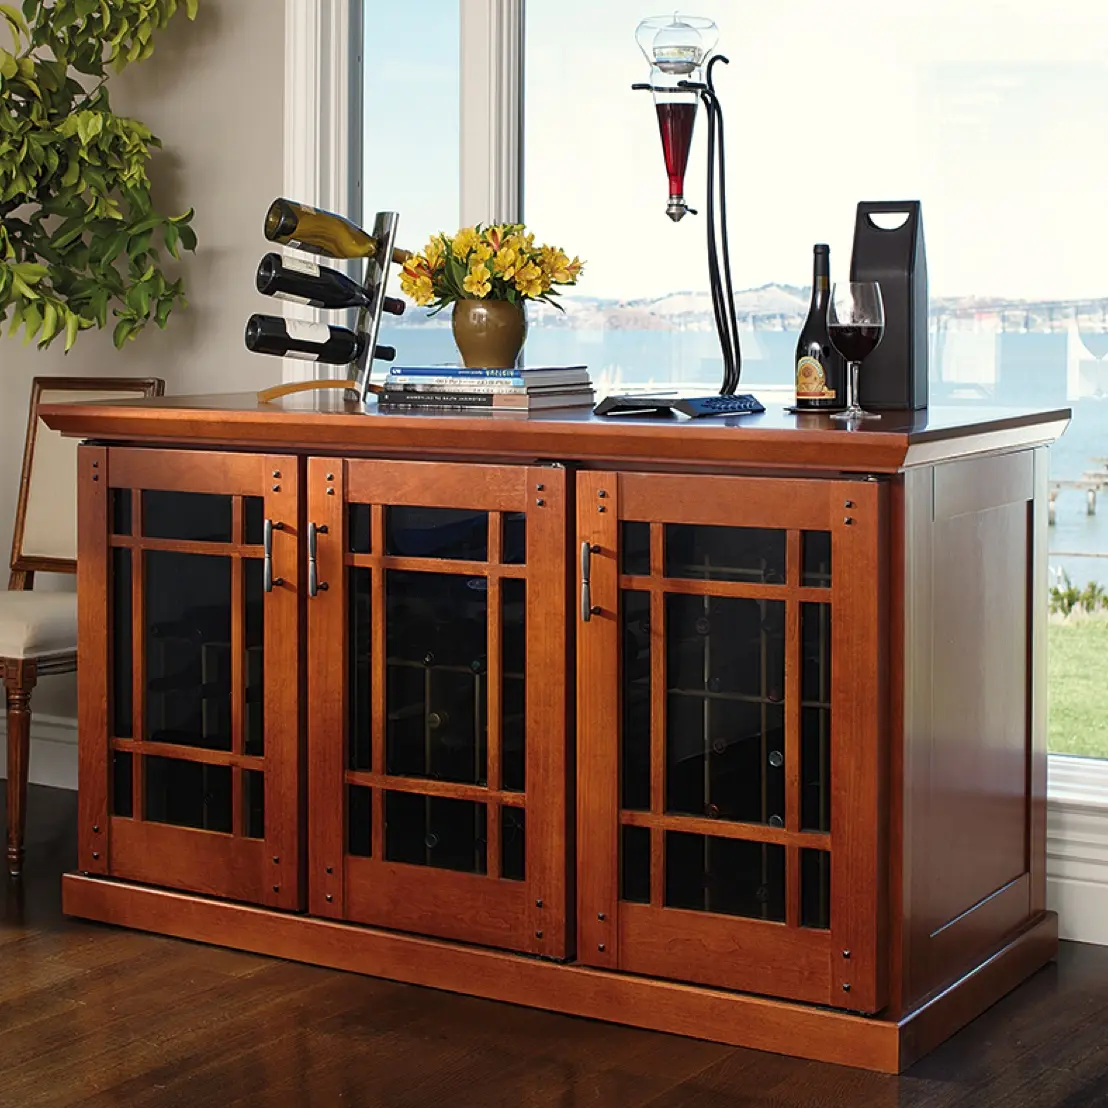 Click here to see more mission/Carolina styled styled wine cabinets